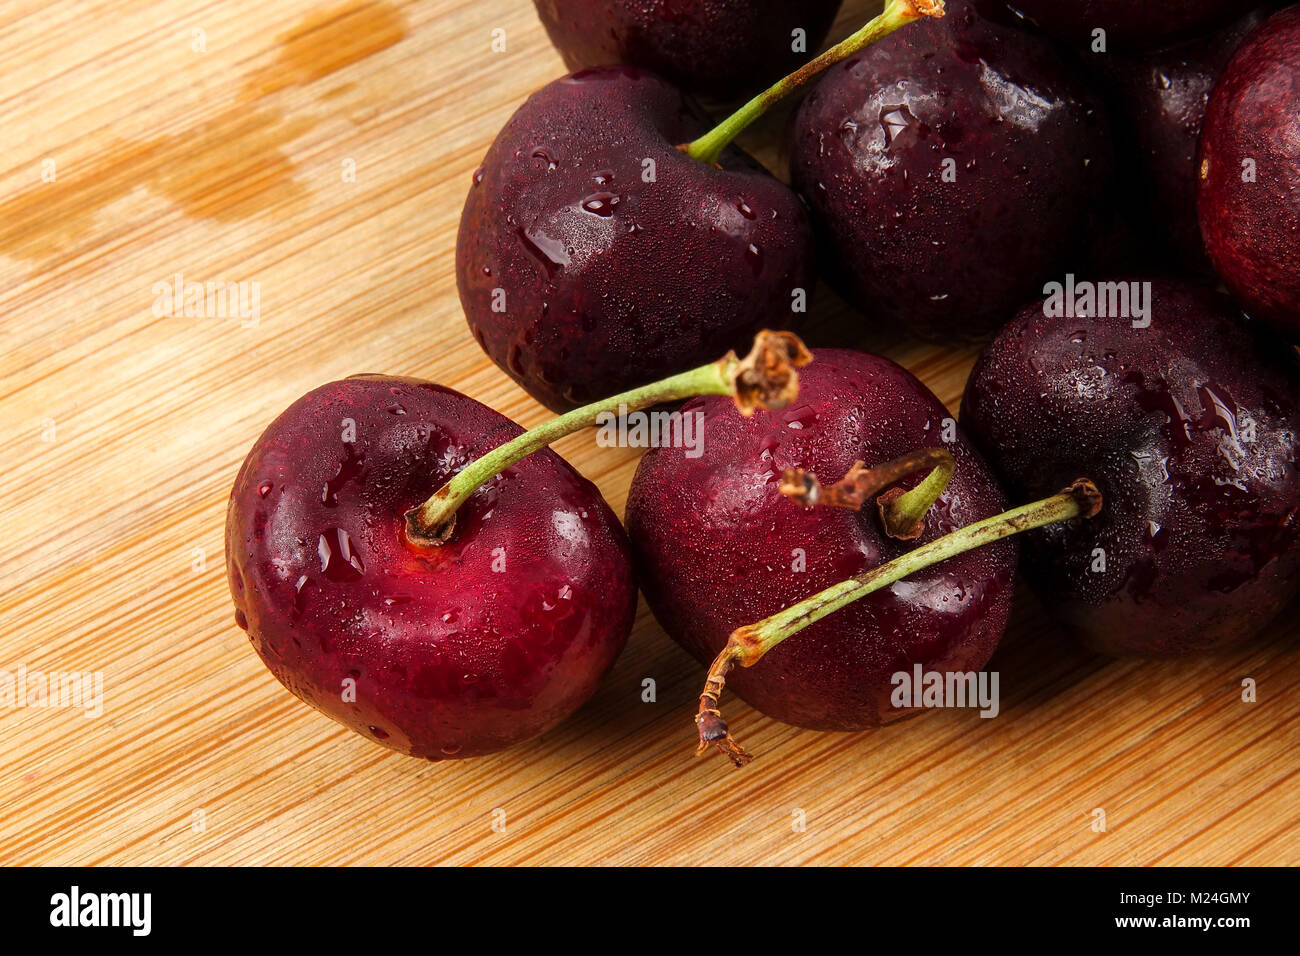 Sweet red cherries on a wooden background. Stock Photo